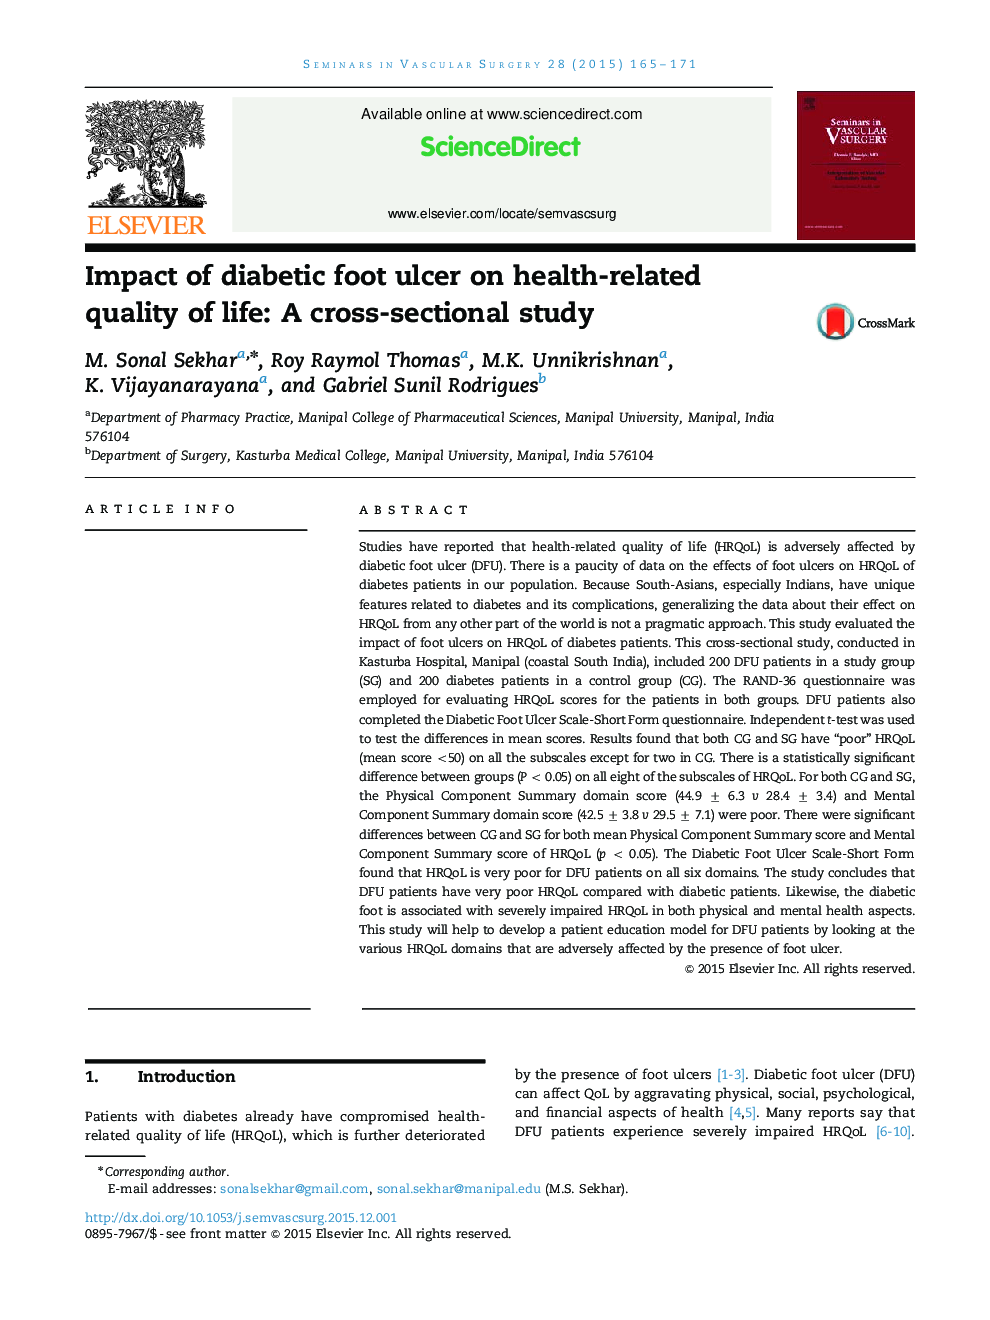 Impact of diabetic foot ulcer on health-related quality of life: A cross-sectional study